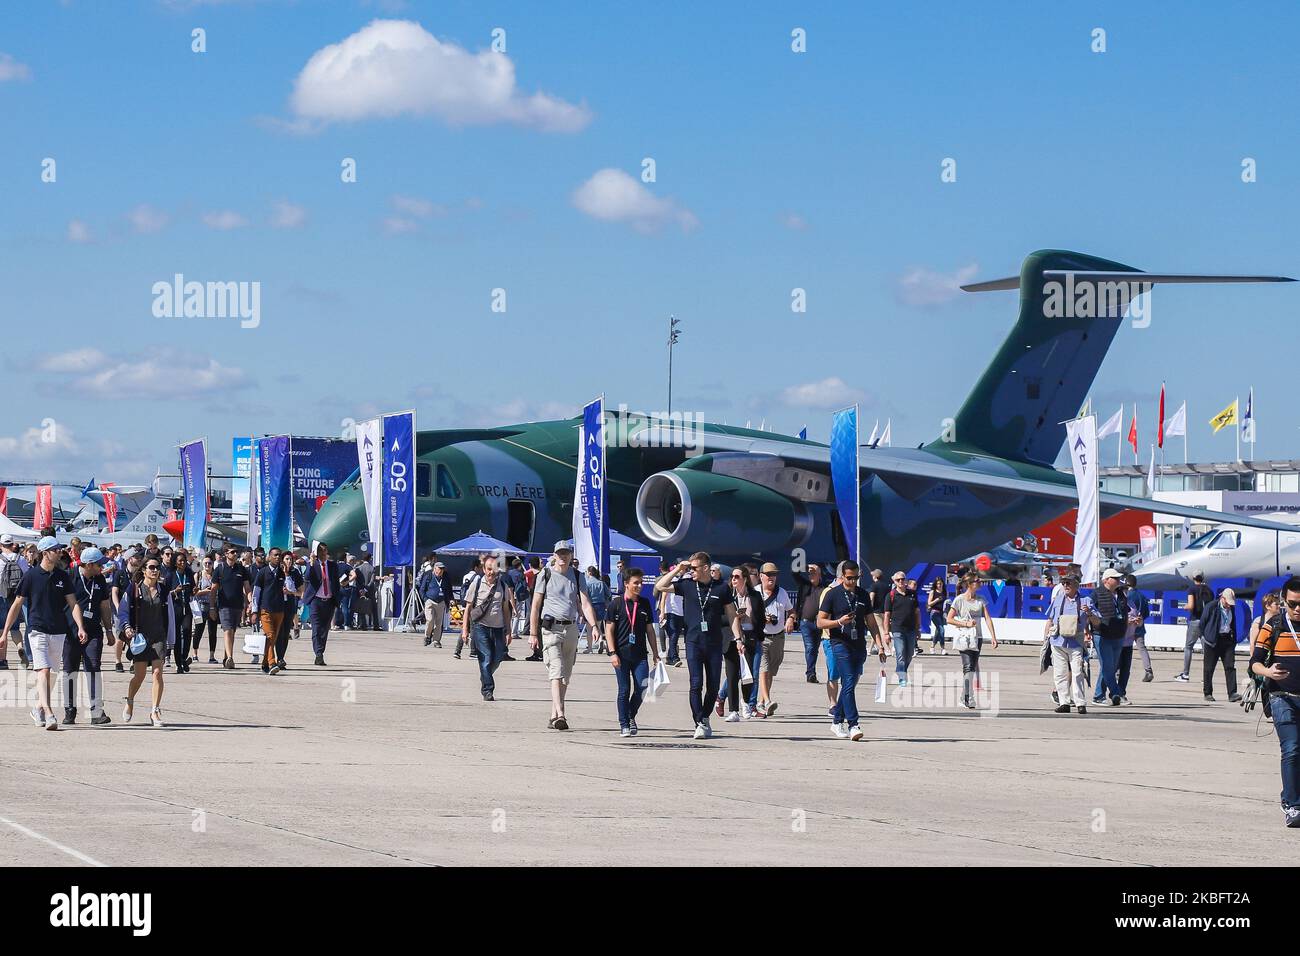 Crowd of visitors at the tarmac of Le Bourget Airport during Paris Air Show 2019 and the Brazilian Air Force Embraer KC-390 renamed after Boeing and Embraer deal as C-390 Millennium, the made in Brazil medium sized transport aircraft as seen on 53rd Paris Air Show Le Bourget in France on June 21, 2019. It is made by Brazilian aerospace manufacturer Embraer Defense and Security with its first flight on February 3, 2019. The military multipurpose airplane for cargo, aerialrefueling and troops can carry 26 tonnes in its fuselage and the 2x IAE V2500 jet engines. The aircraft registration is PT-ZN Stock Photo